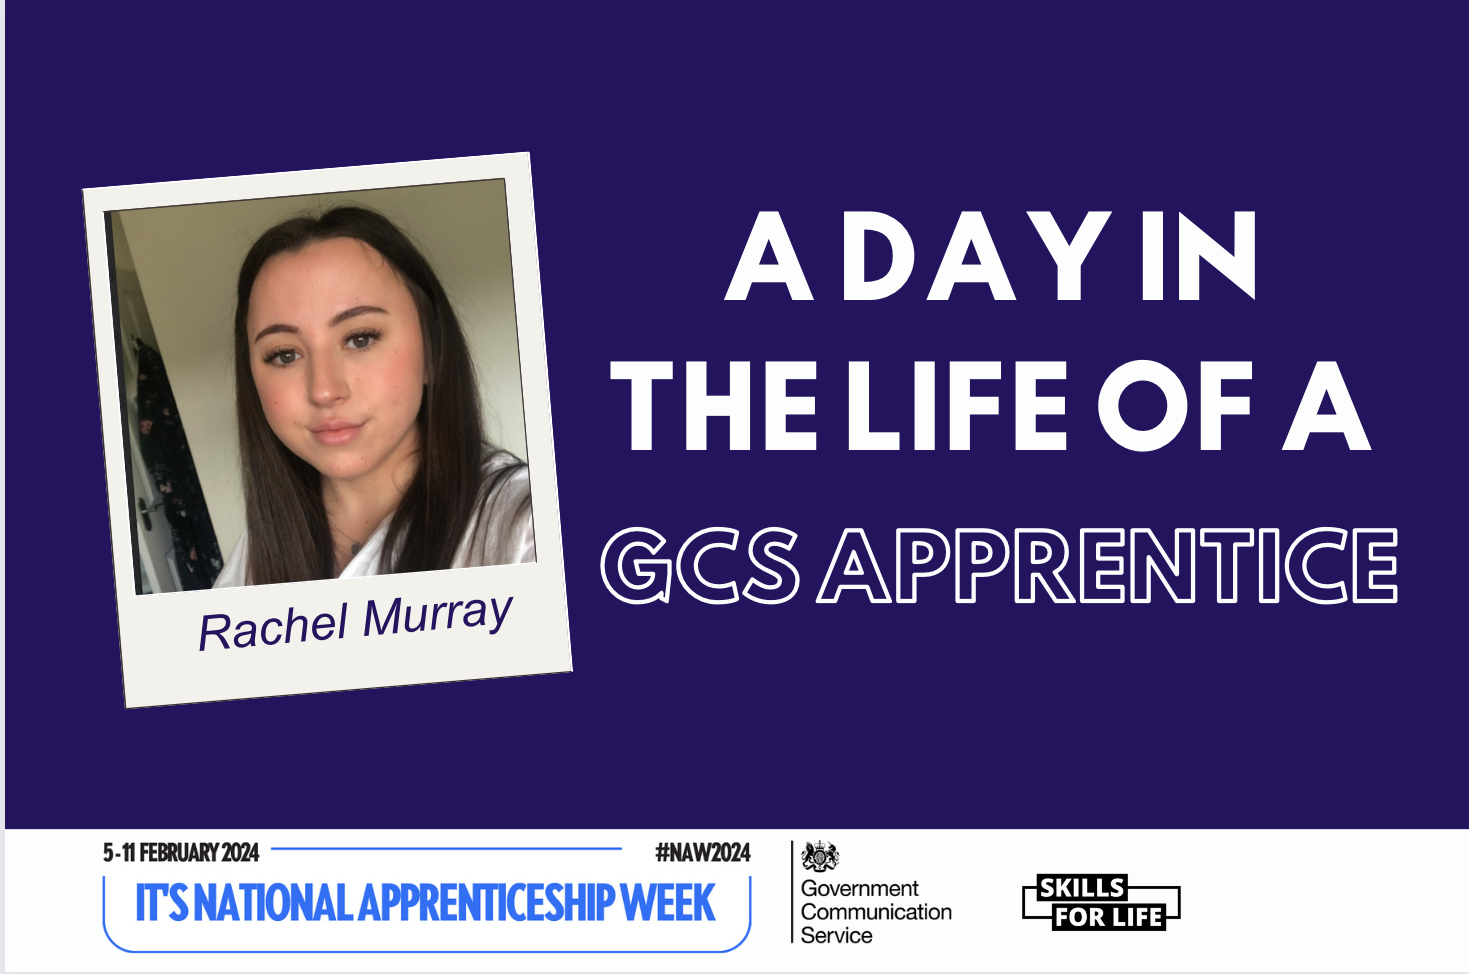 Bright blue text reads: It’s National Apprenticeship Week! 5 - 11 February 2024. The hashtag is: NAW2024. A white GCS logo is in the bottom left, along with the Skills for Life logo which is black. In the bottom right corner is a polaroid photo which has the caption: Rachel Murray, current GCS Apprentice.